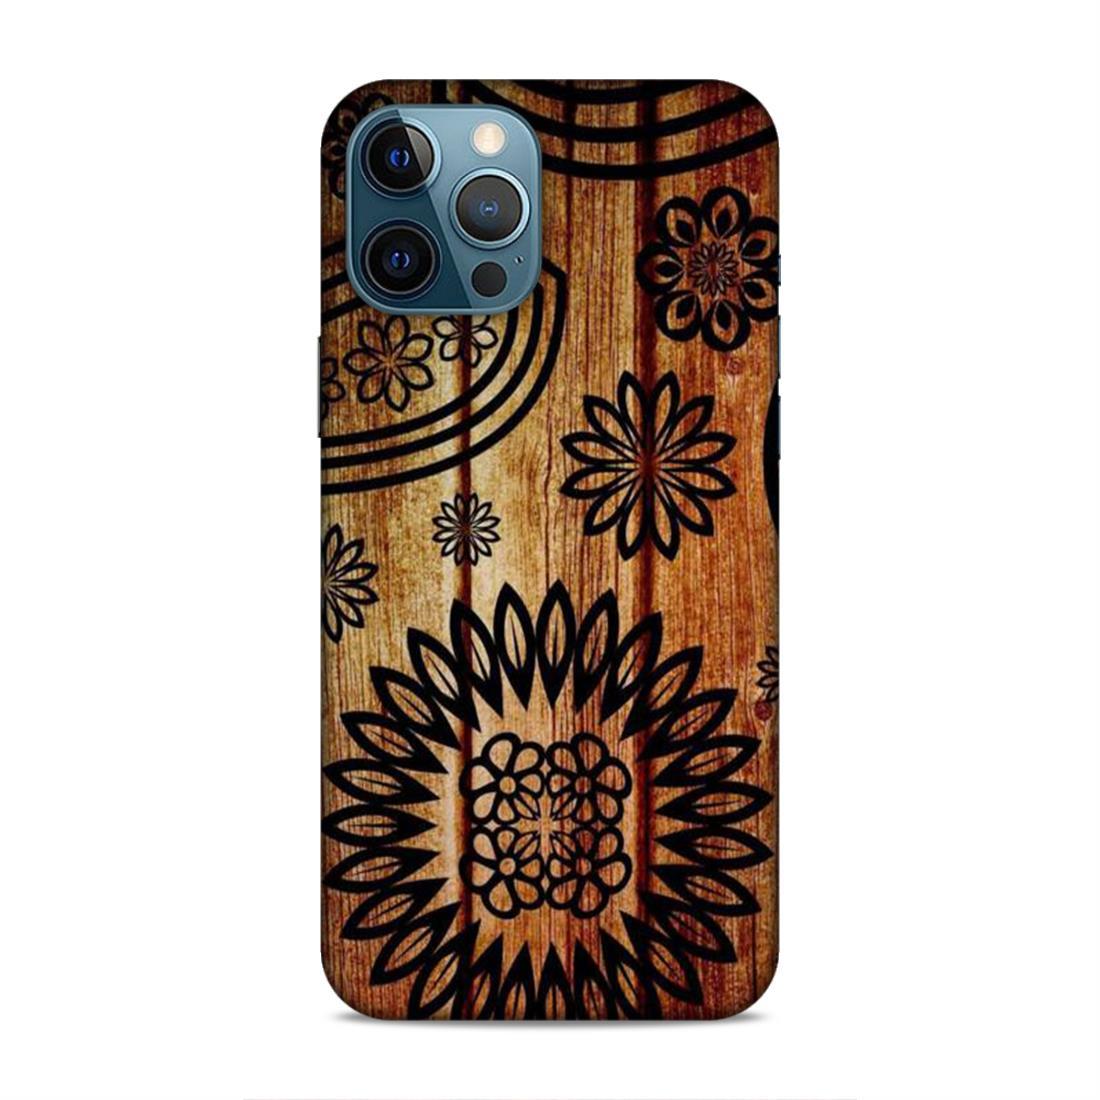 Wooden Look Pattern iPhone 12 Pro Max Mobile Case Cover